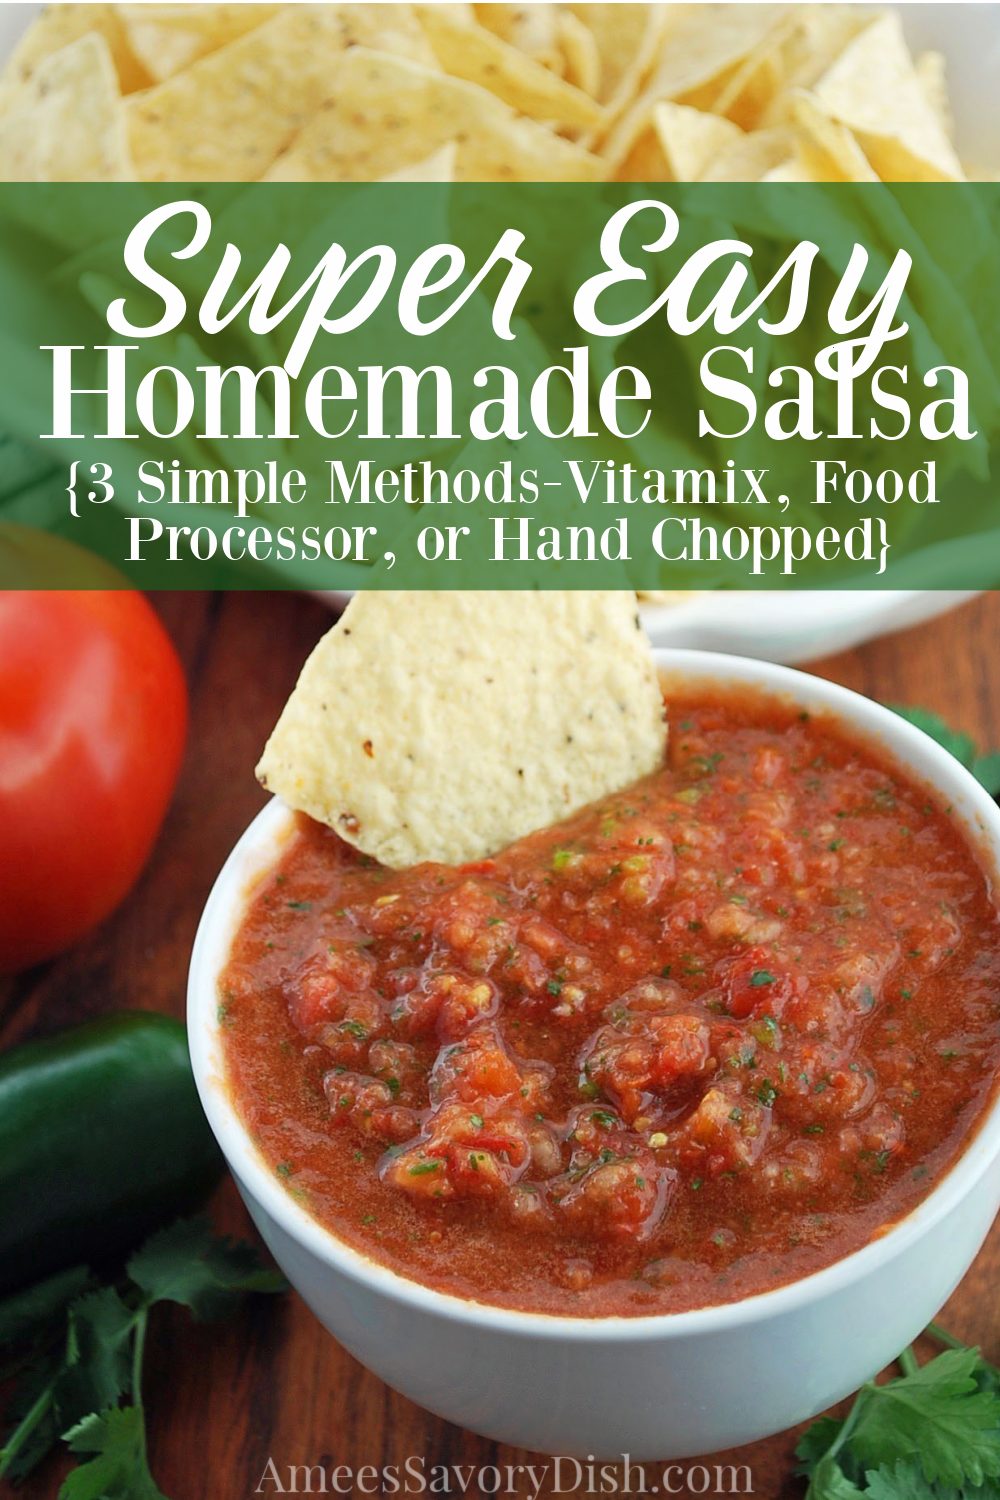 This homemade salsa recipe made with fresh tomatoes, onion, jalapeño, lime juice, and fresh cilantro.  There's no need to buy salsa when it's this easy to make! #homemadesalsa #freshsalsa #easysalsa #salsarecipe via @Ameessavorydish